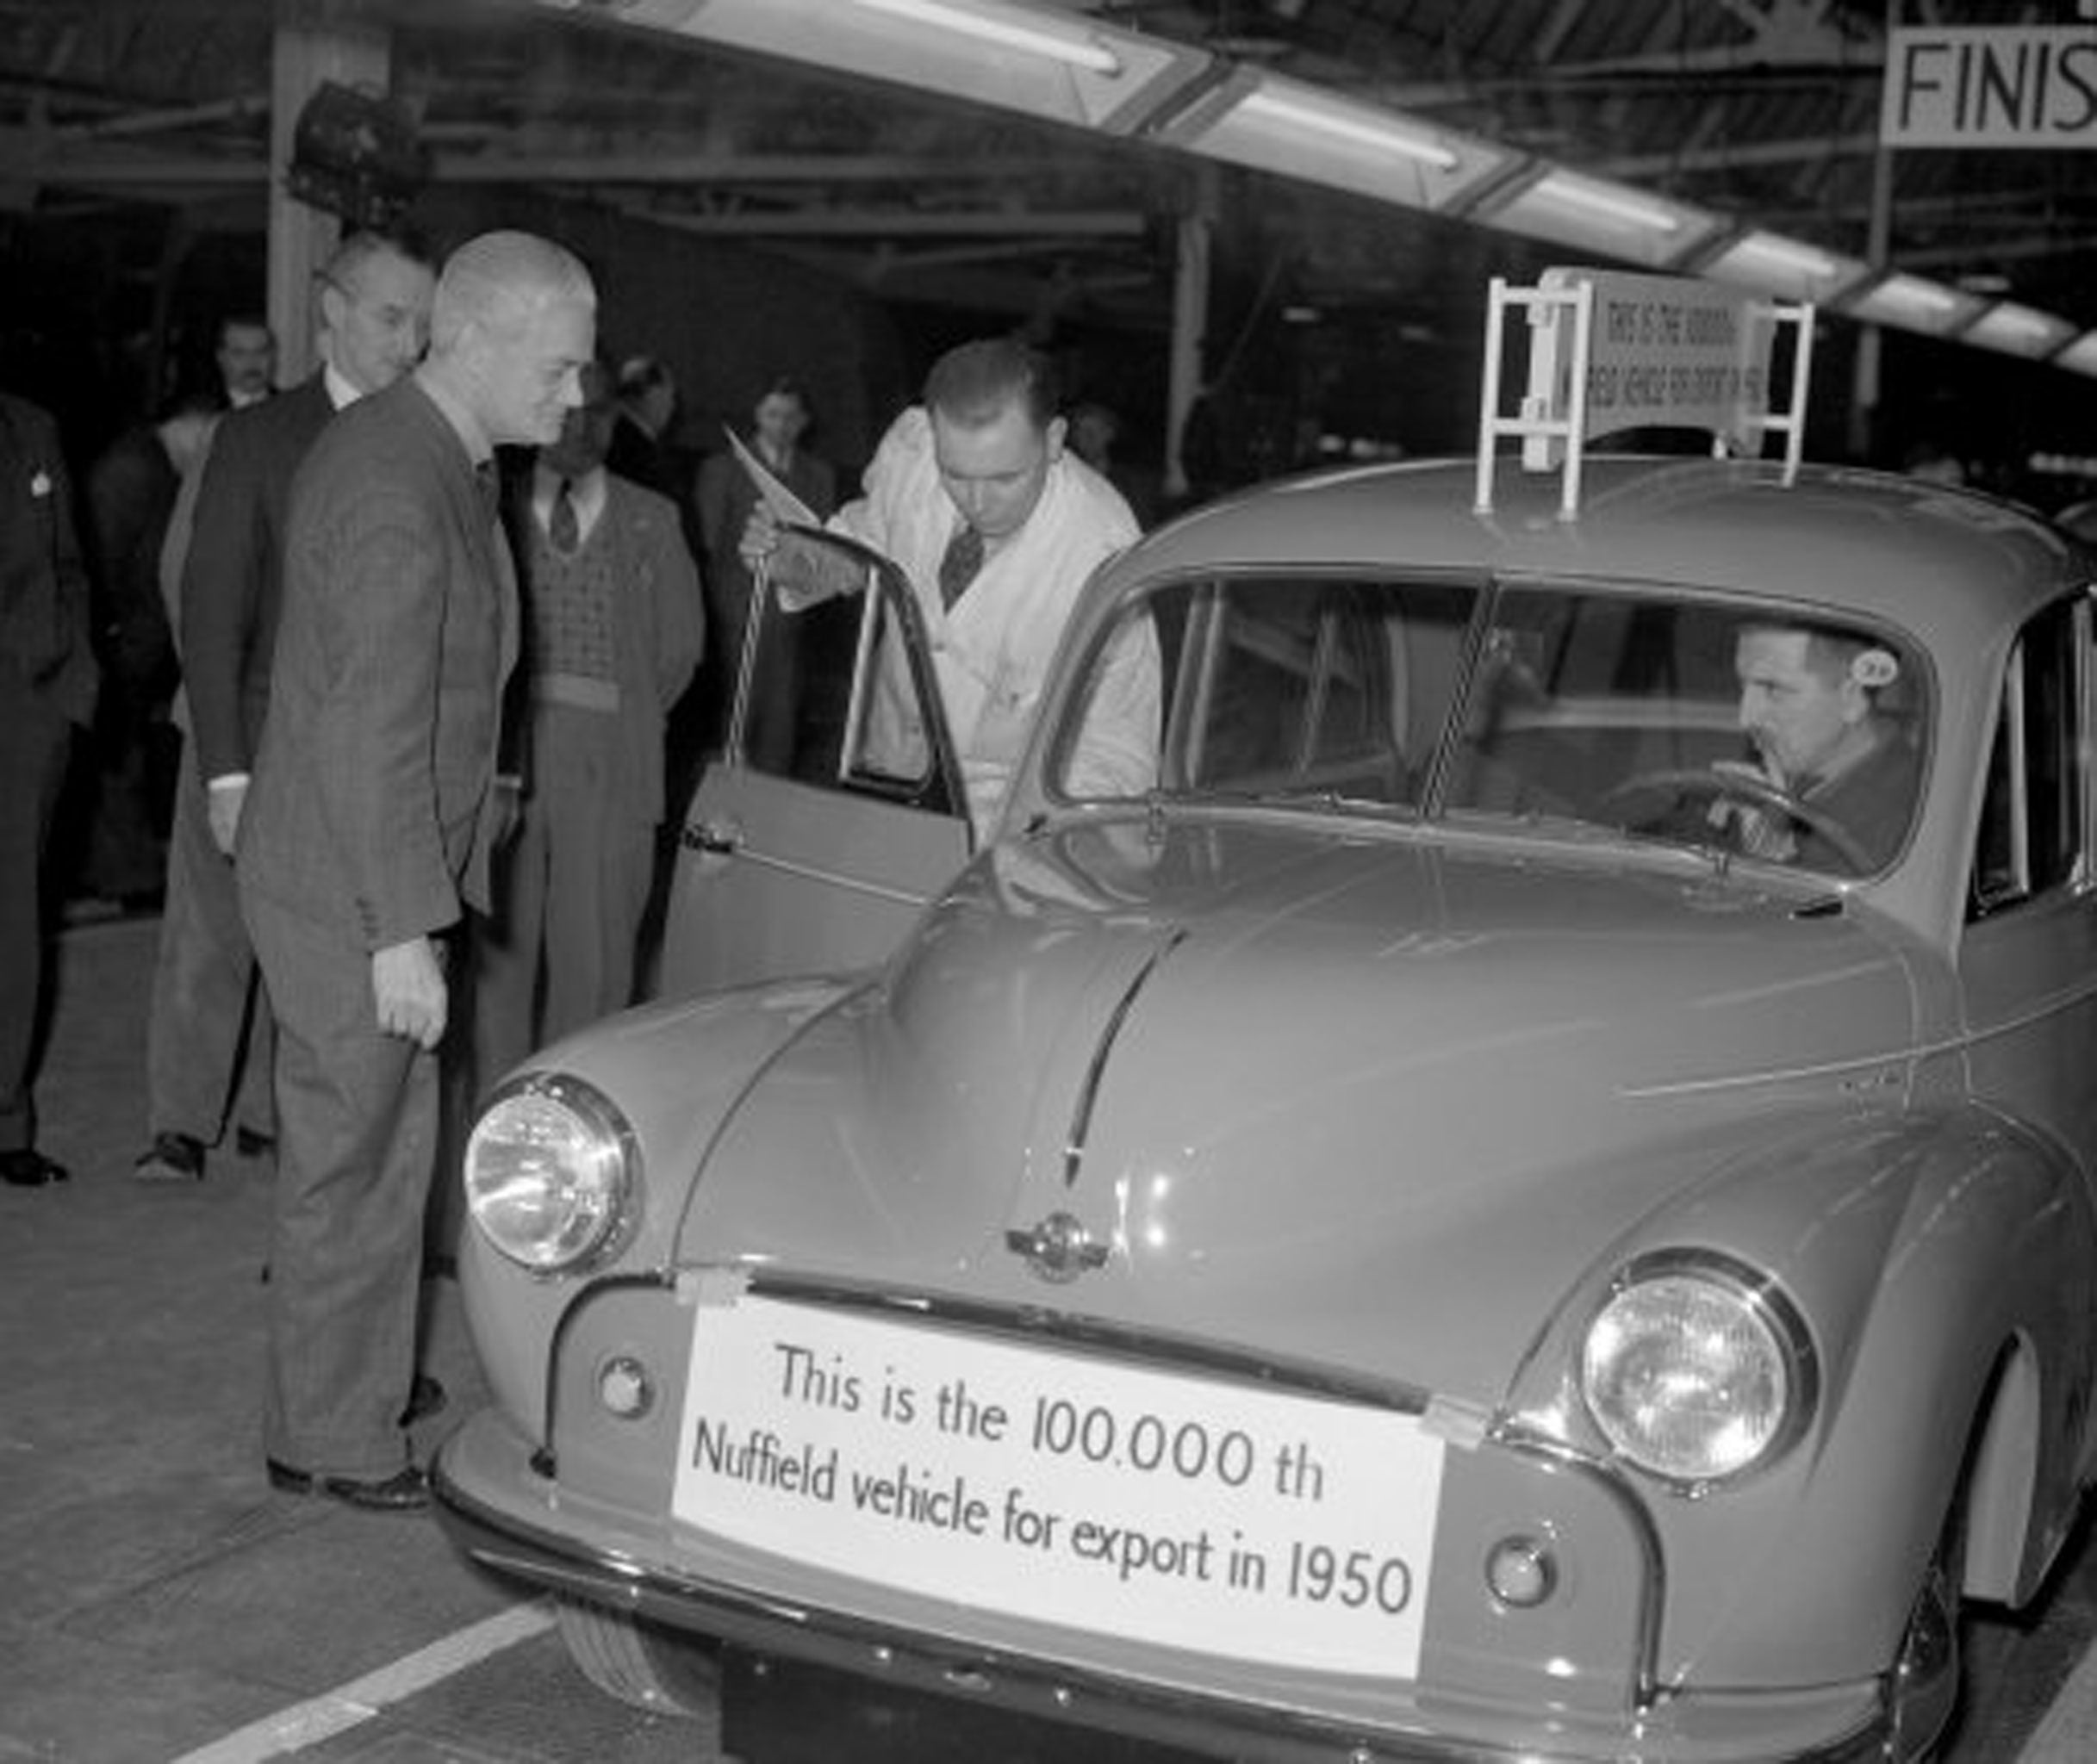 Lord Nuffield at the Morris Works assembly line in Cowley, 1950